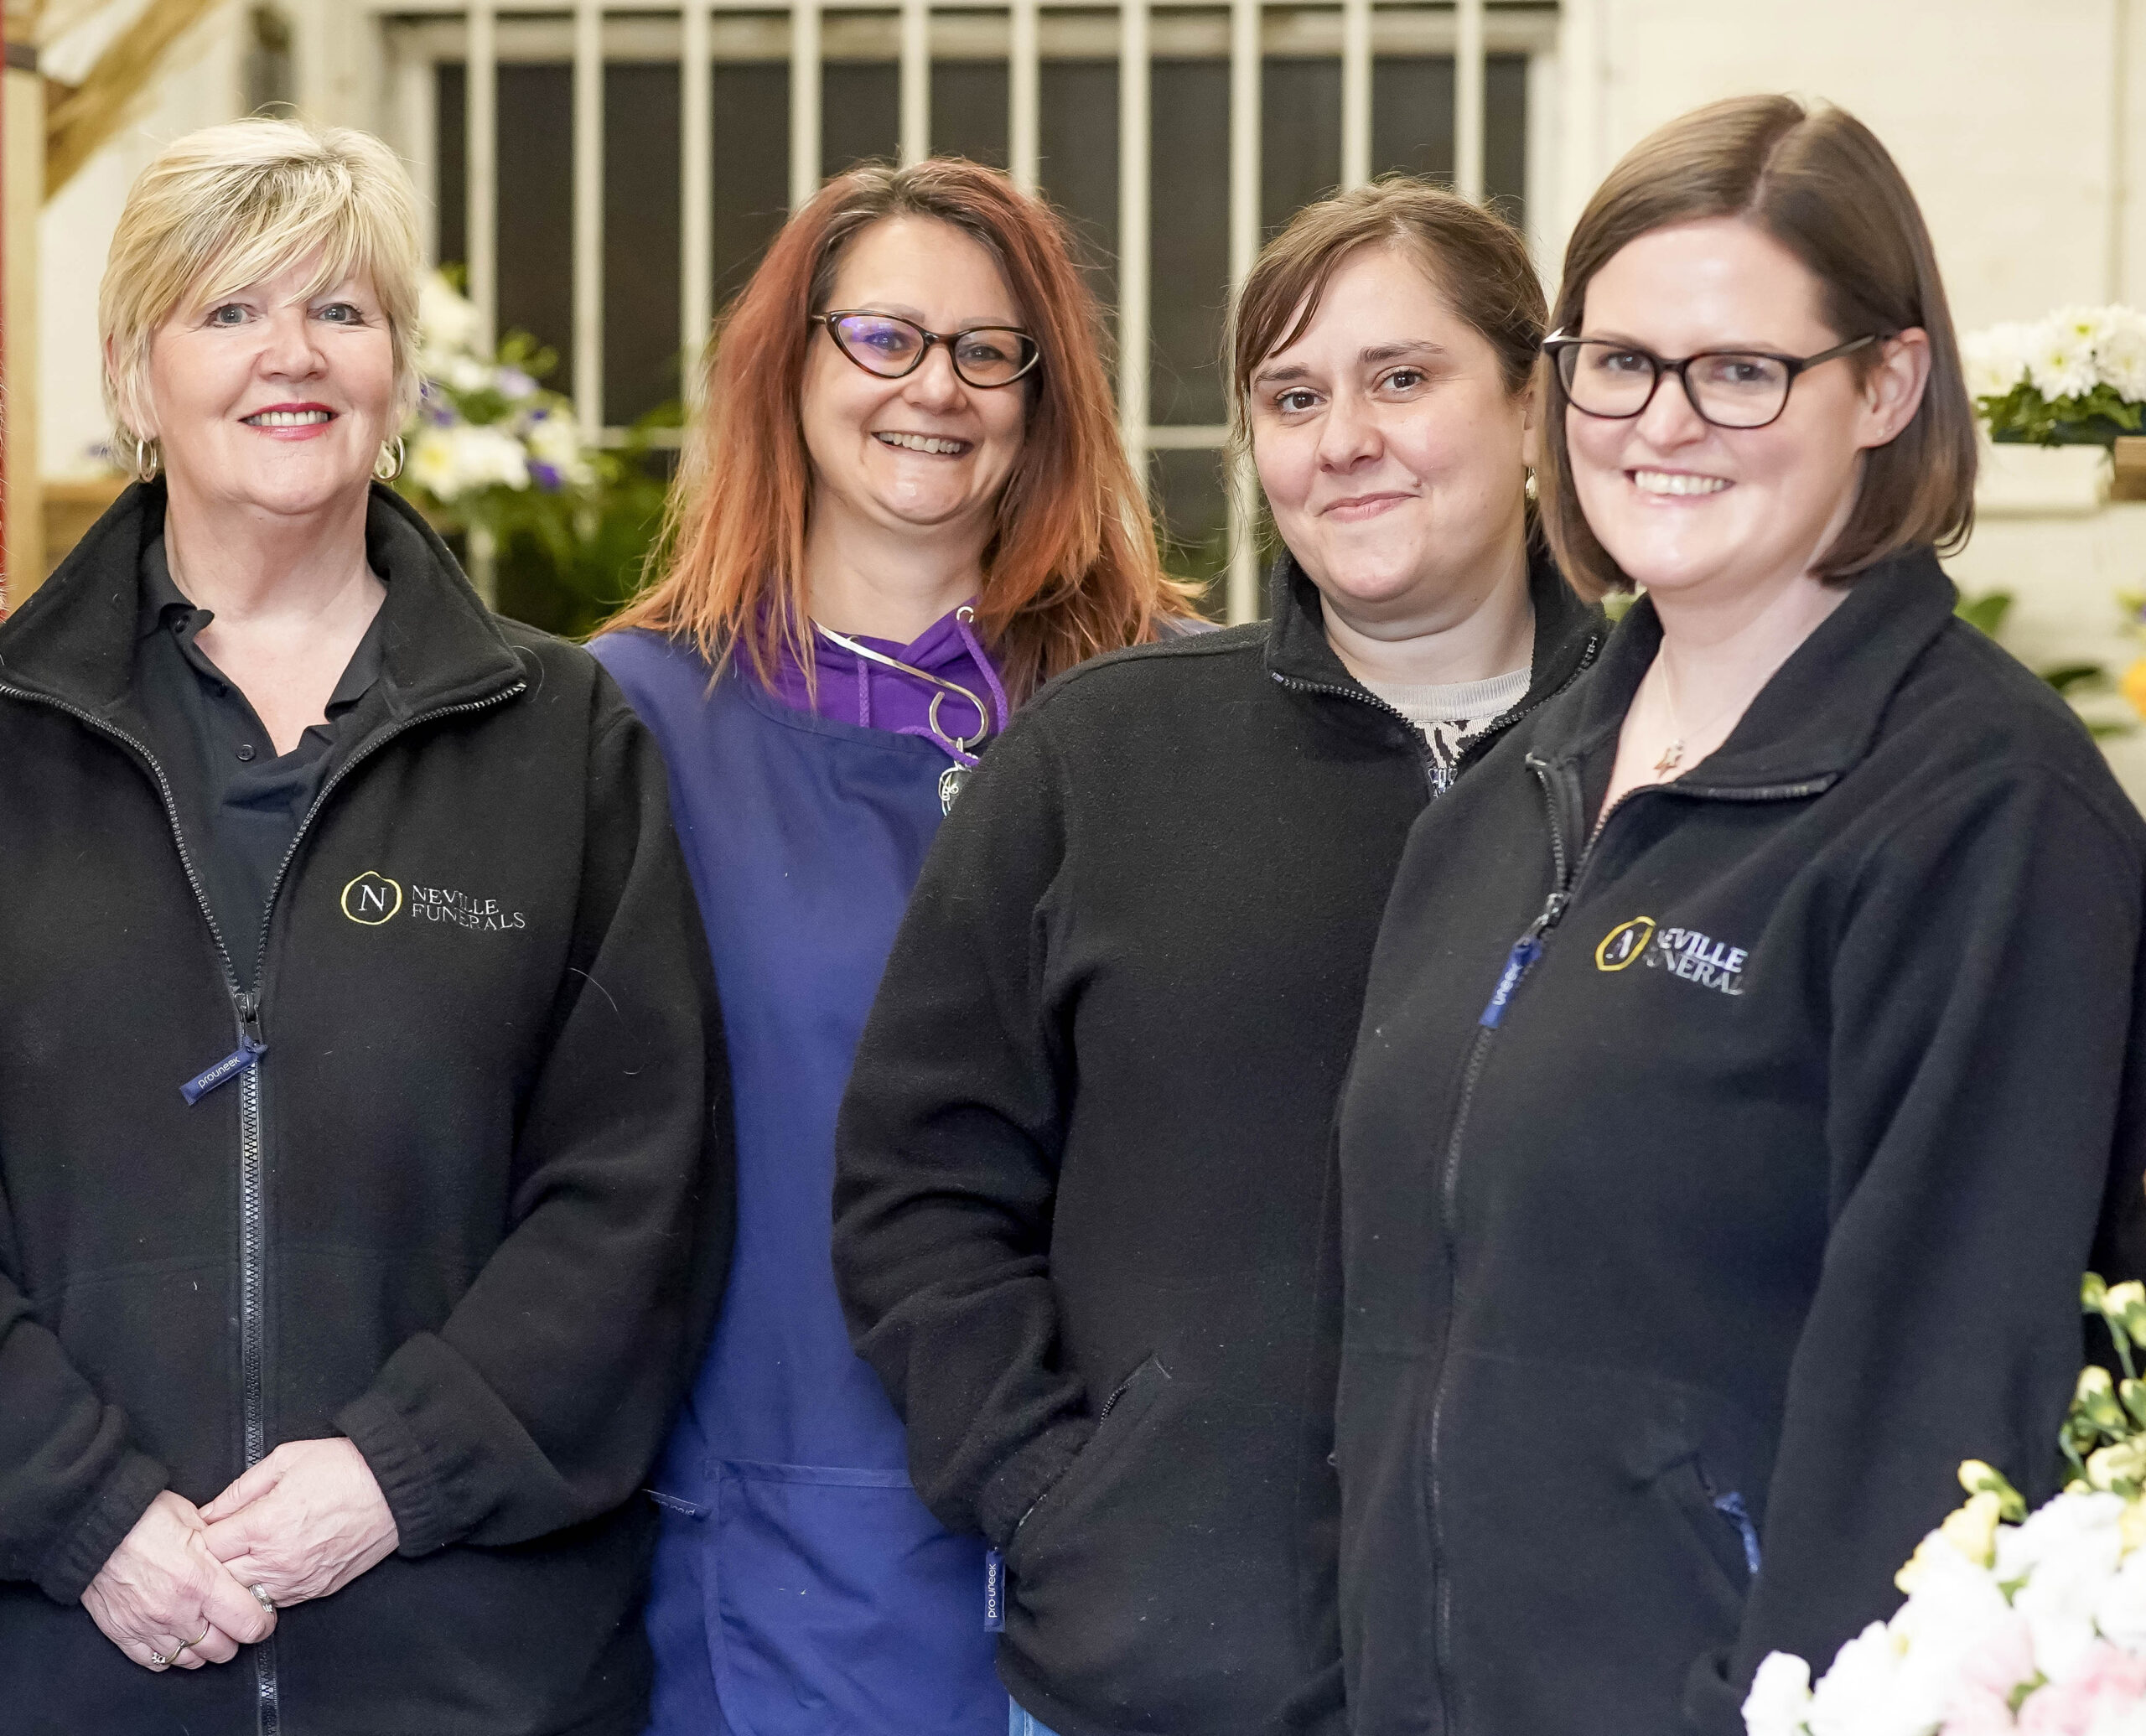 Florist Dream Team is Blooming at Neville Funerals